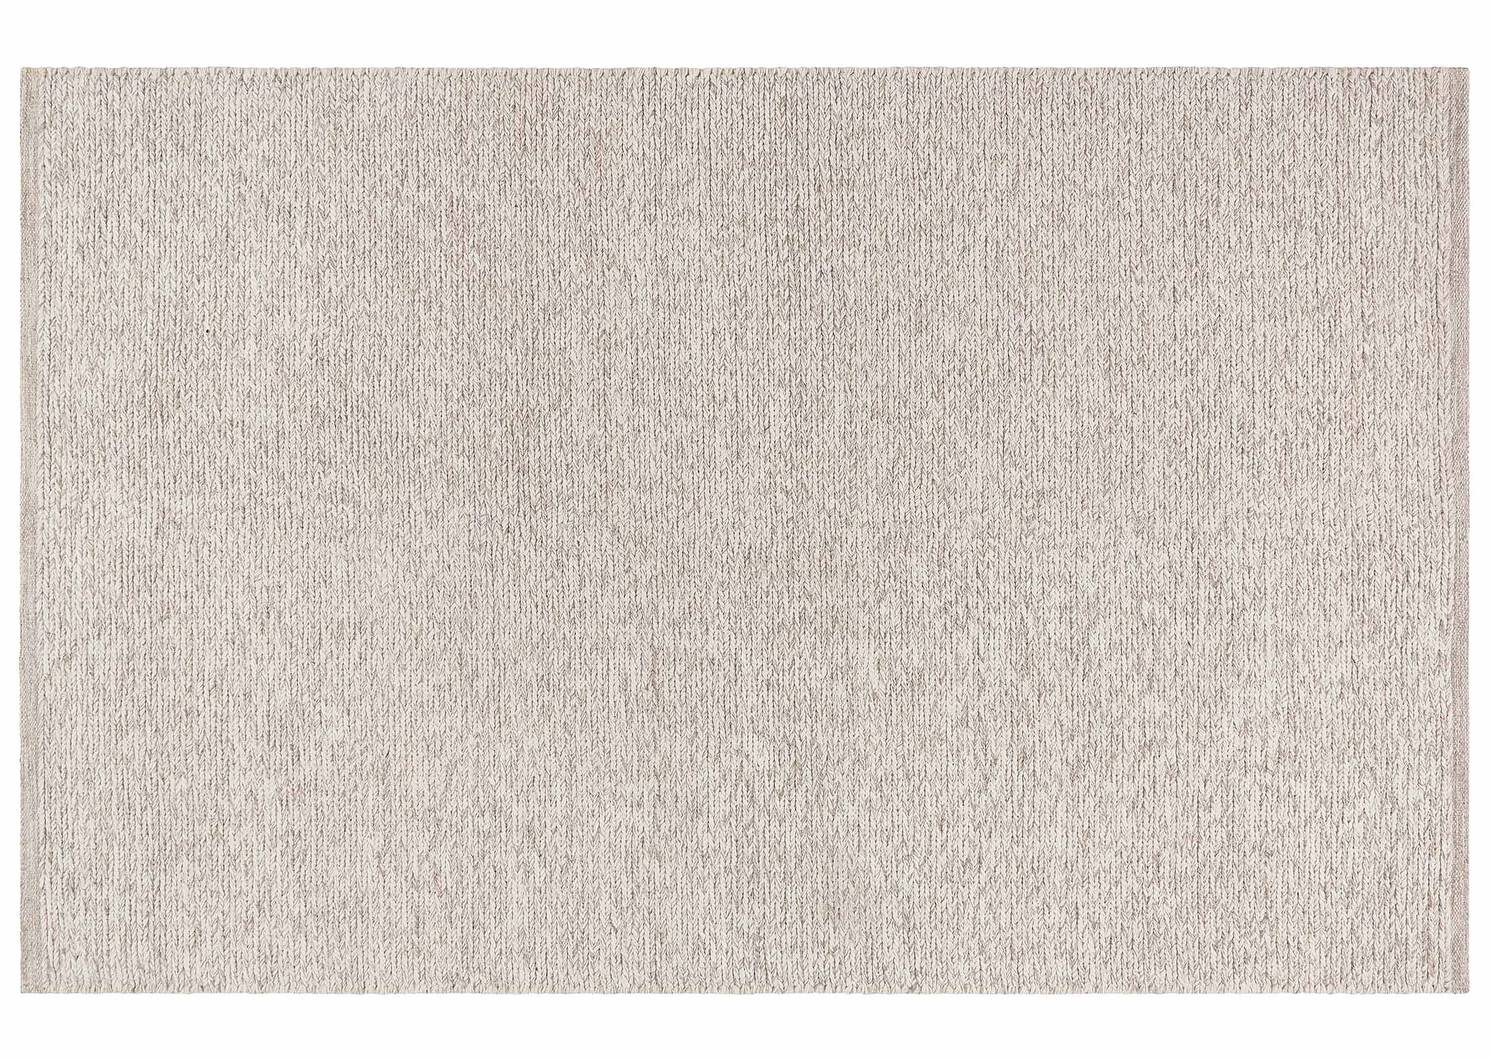 Cosette Rug 96x120 Ivory/Natural